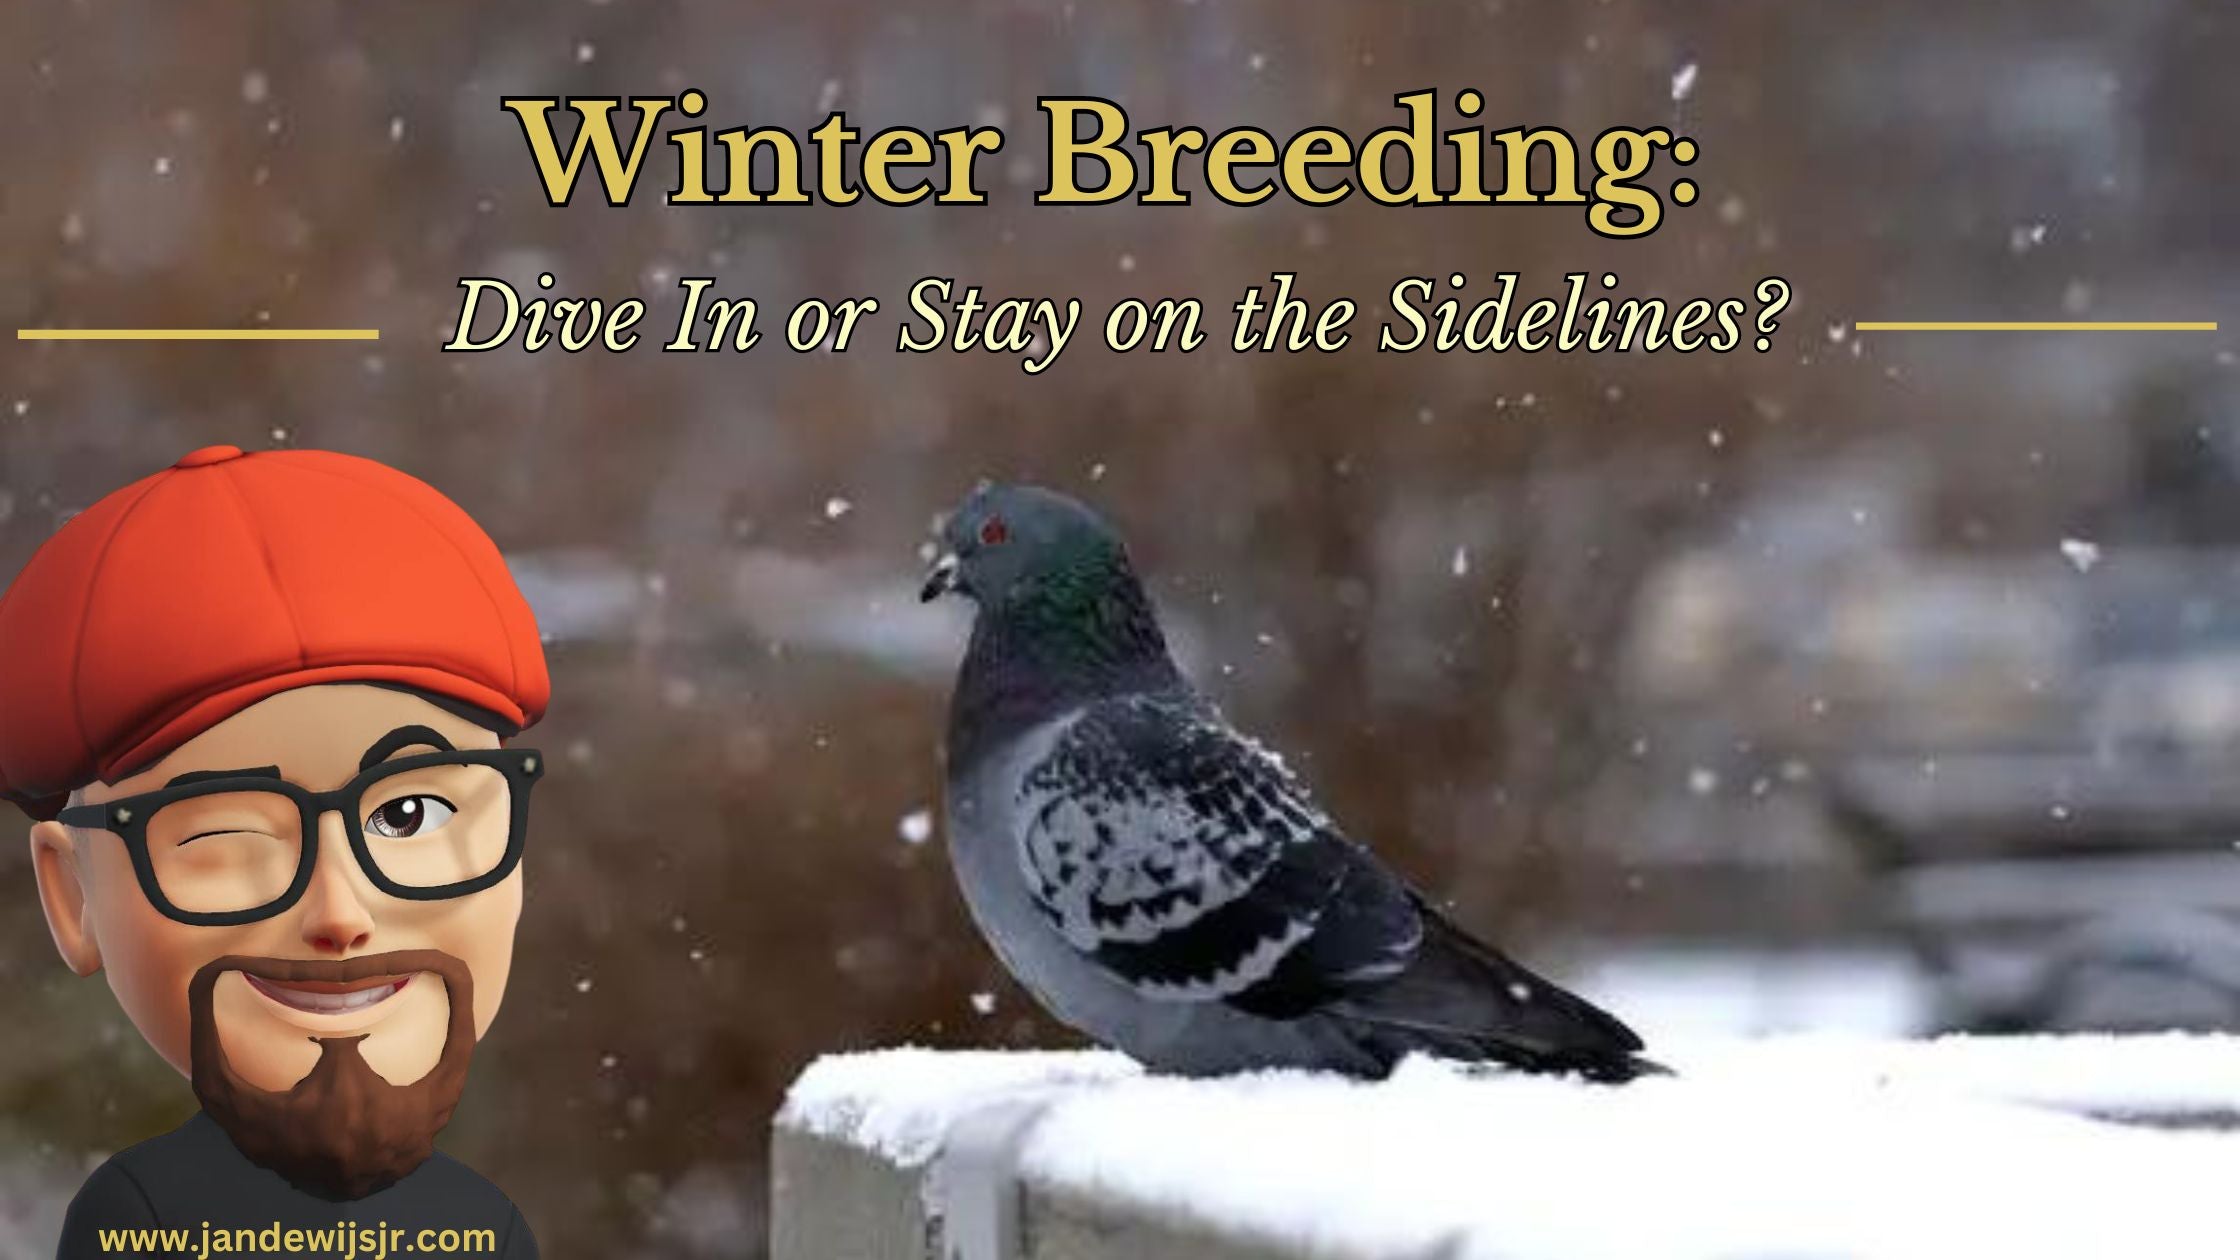 Winter Breeding with racing pigeons: Dive In or Stay on the Sidelines?